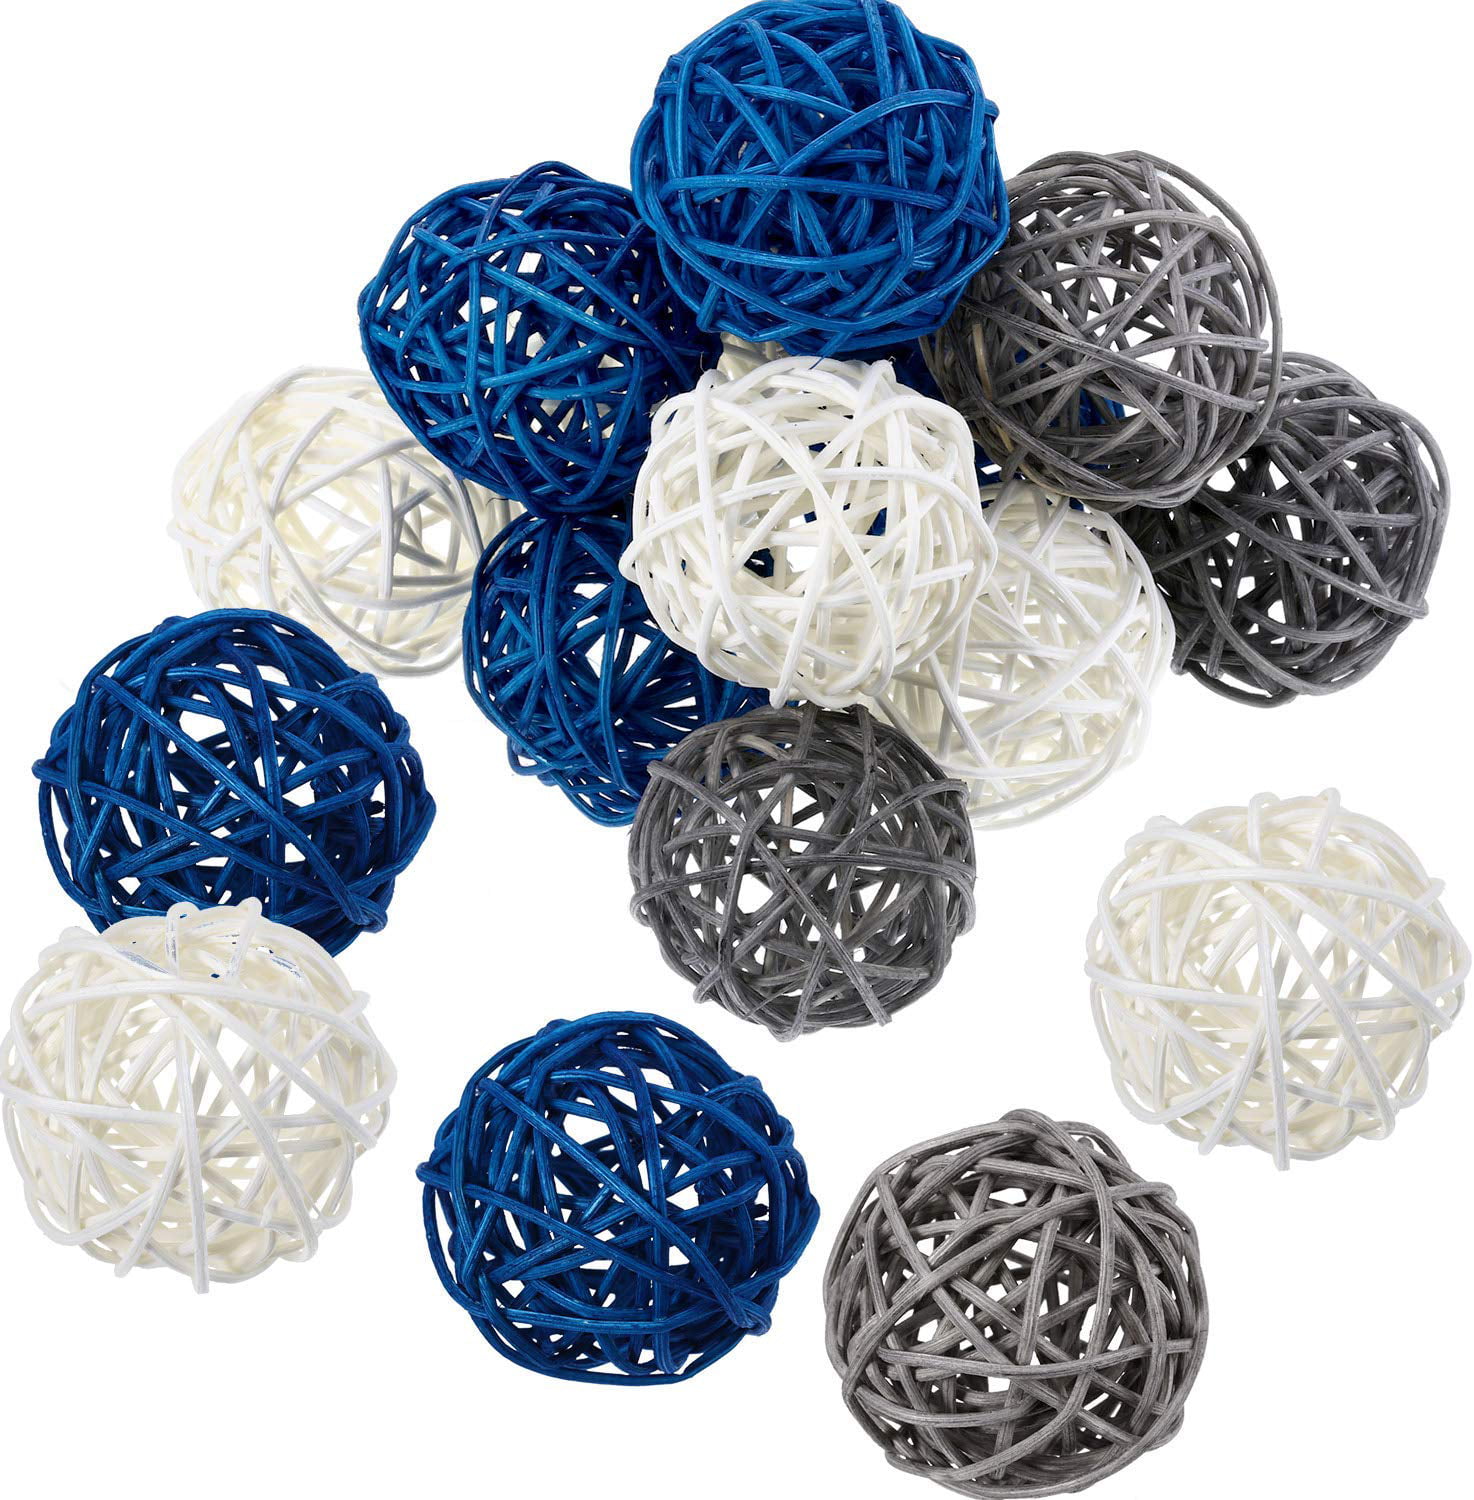 4 Colors Hamnor Wicker Rattan Balls 32 Pcs Decorative Orbs Natural Spheres Vase Fillers for Home Wedding Party Baby Shower Christmas Decorative Crafts 